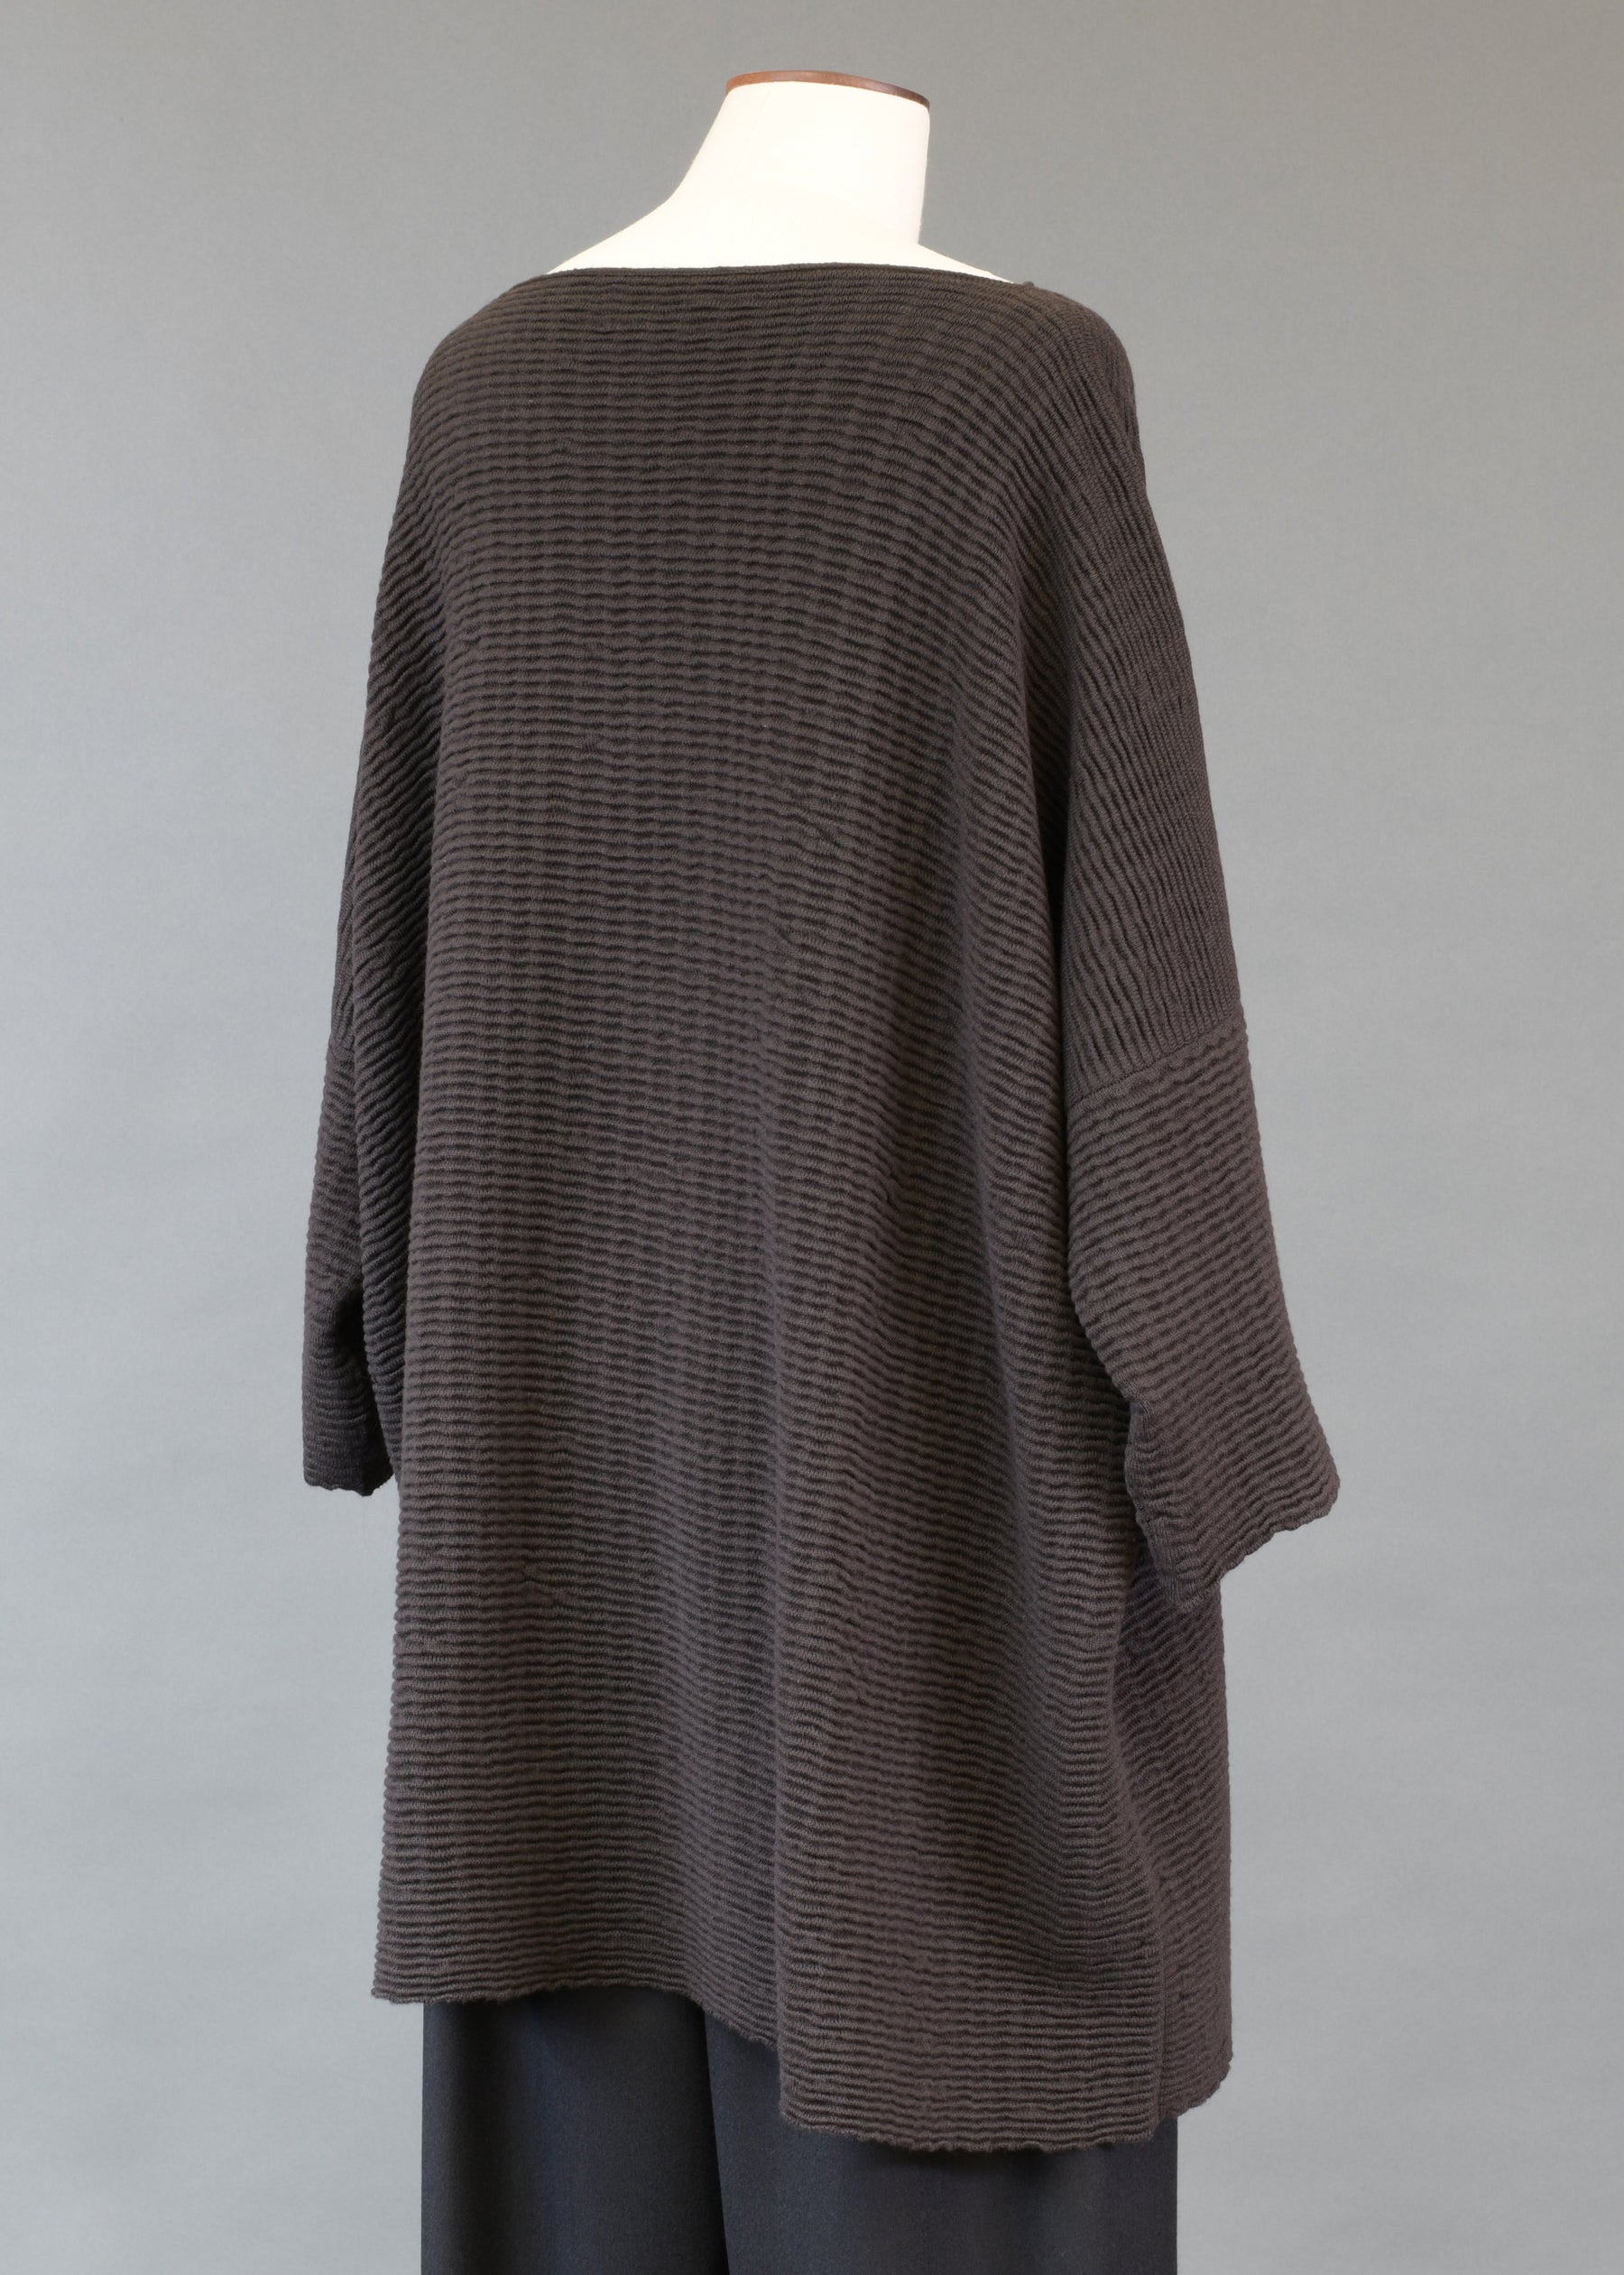 square 3/4 sleeve knit top - long